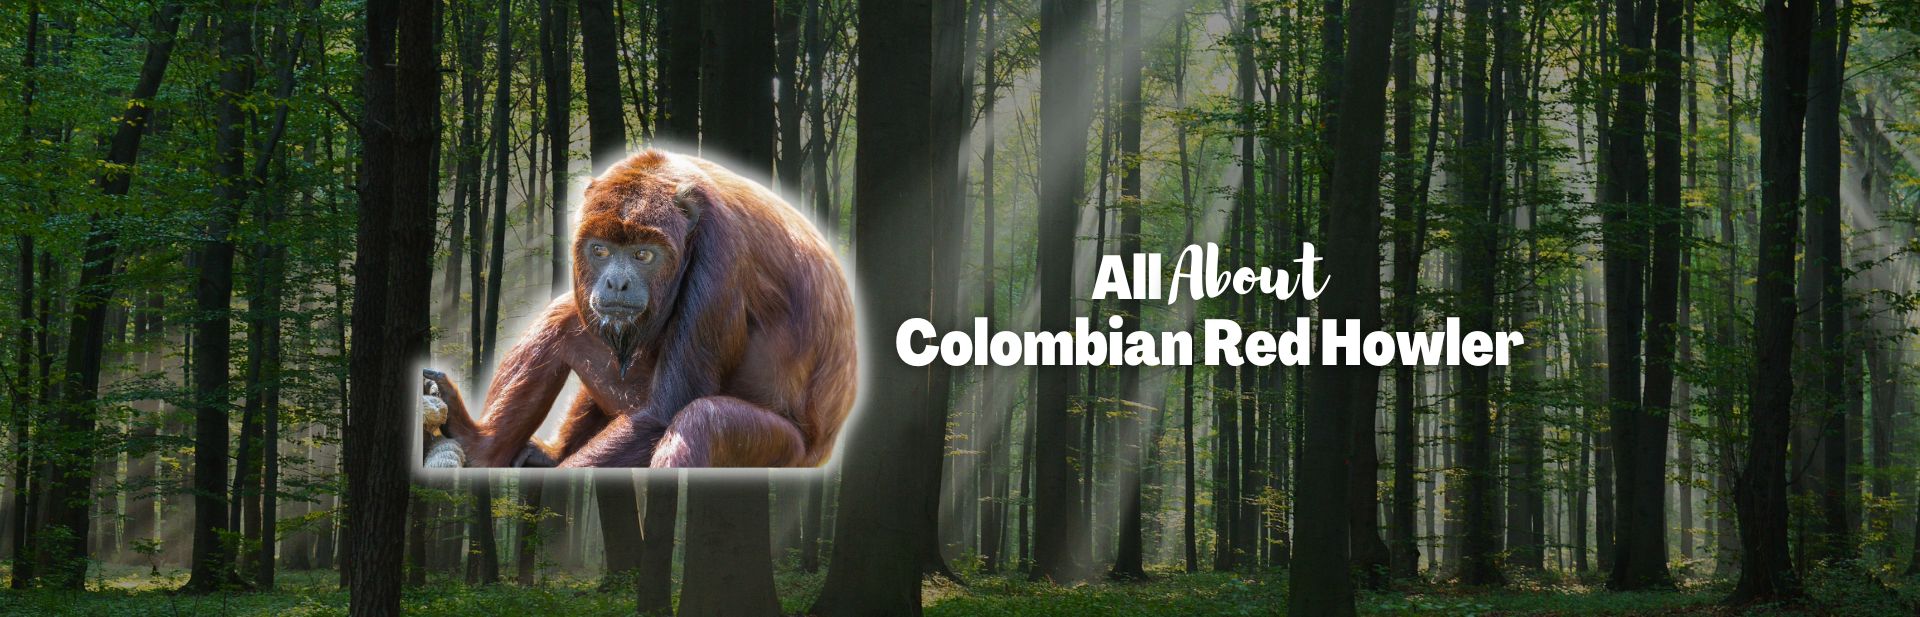 Colombian Red Howler: The Amazon’s Loud and Vibrant Primate